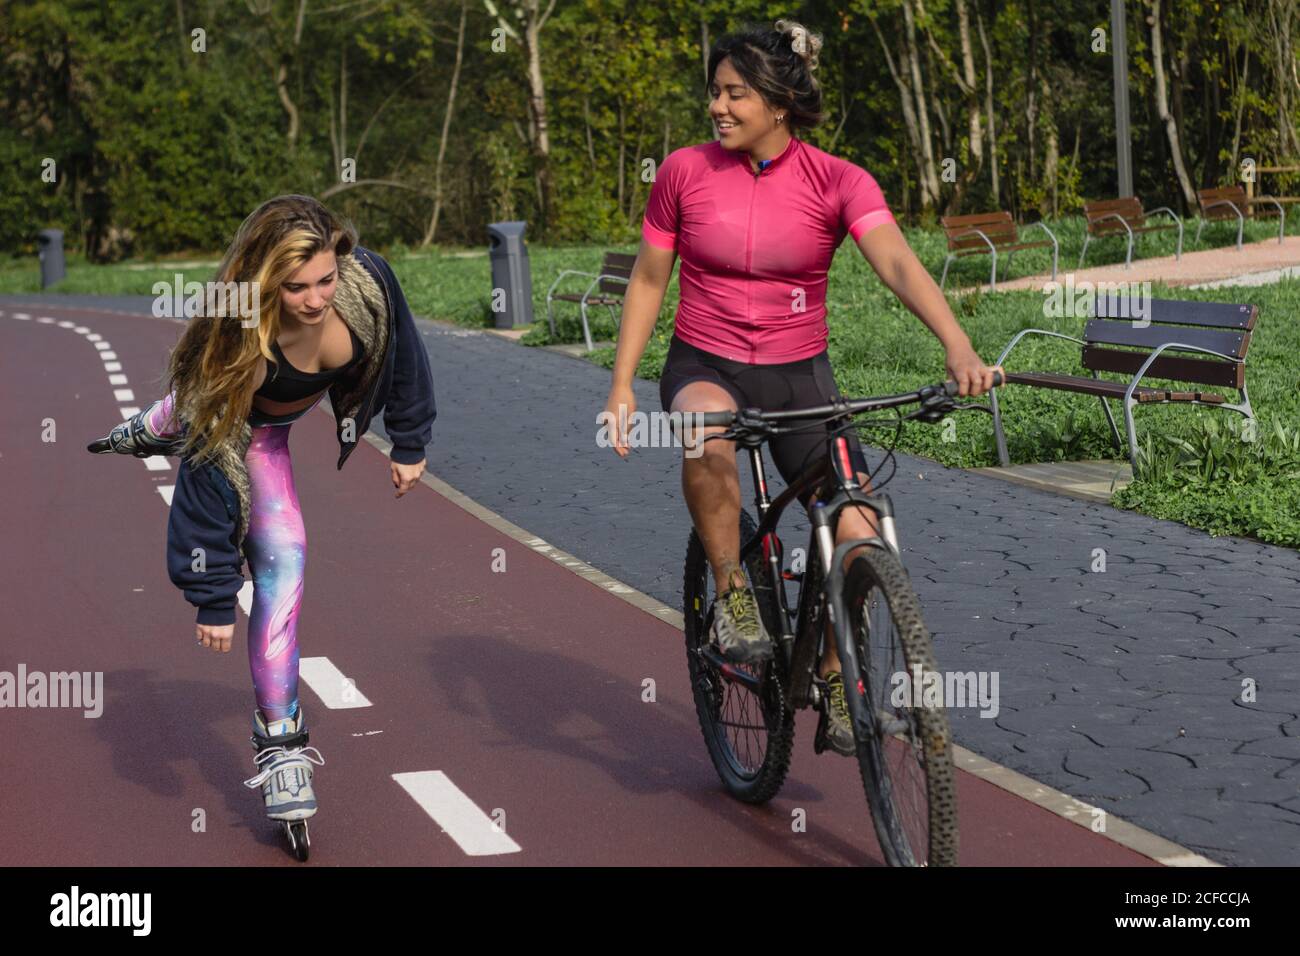 Young multiethnic girlfriends in sportswear actively chatting during weekend while rollerblading and riding bike along bicycle lane in park Stock Photo